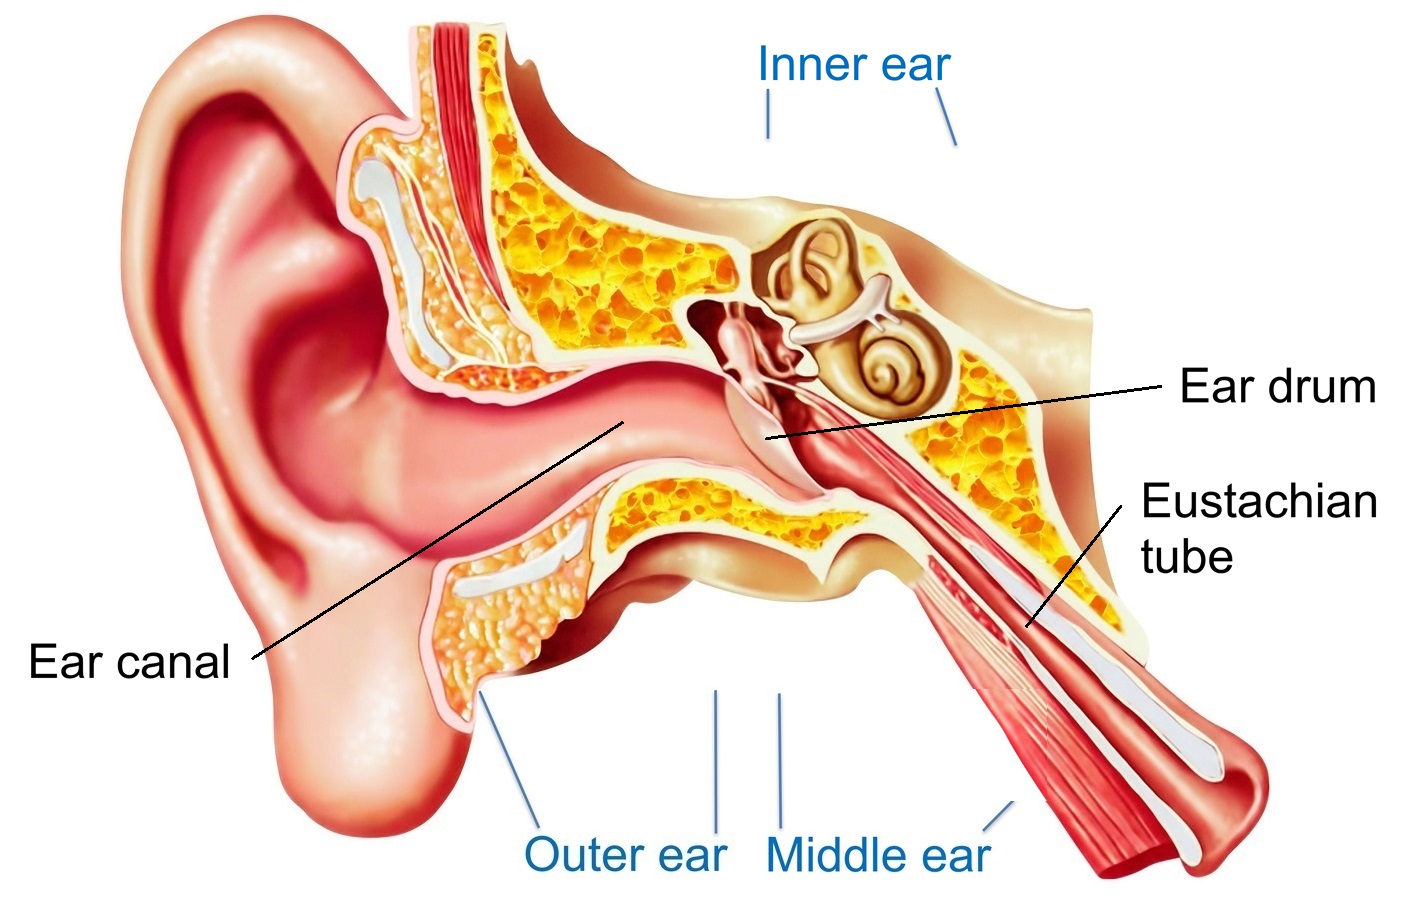 Can You Put Alcohol In Your Ear To Dry Up Fluid Ear Infection Middle Ear Symptoms Treatment Southern Cross Nz